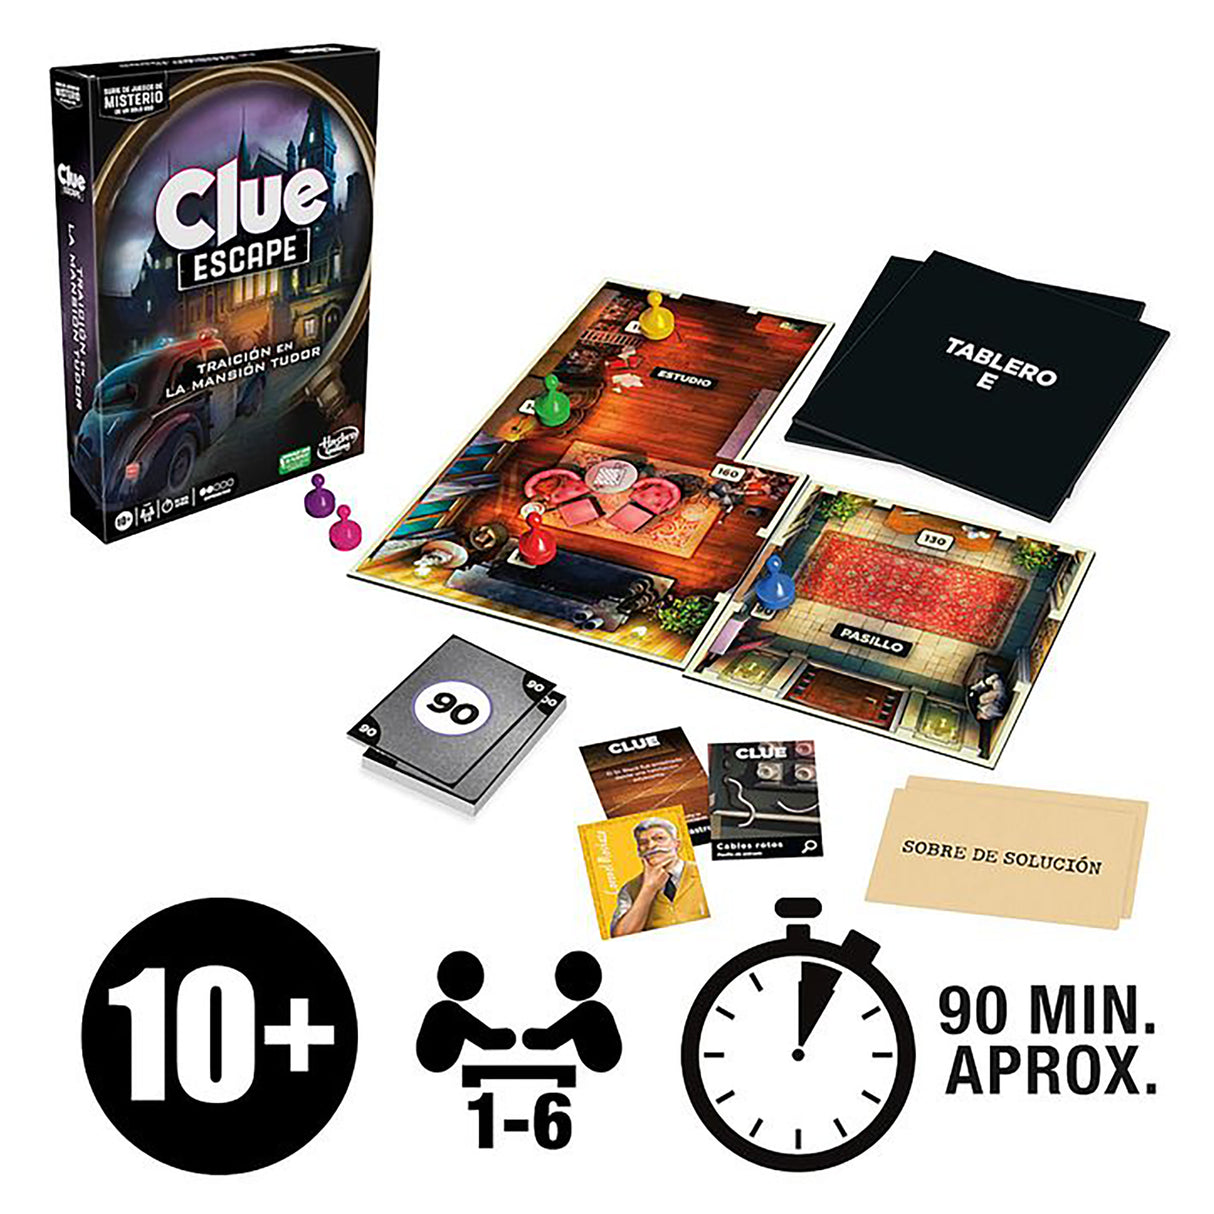 Cluedo Board Game Treachery at Tudor Mansion, Cluedo Escape Room Game,  Cooperative Family Board Game, Mystery Games